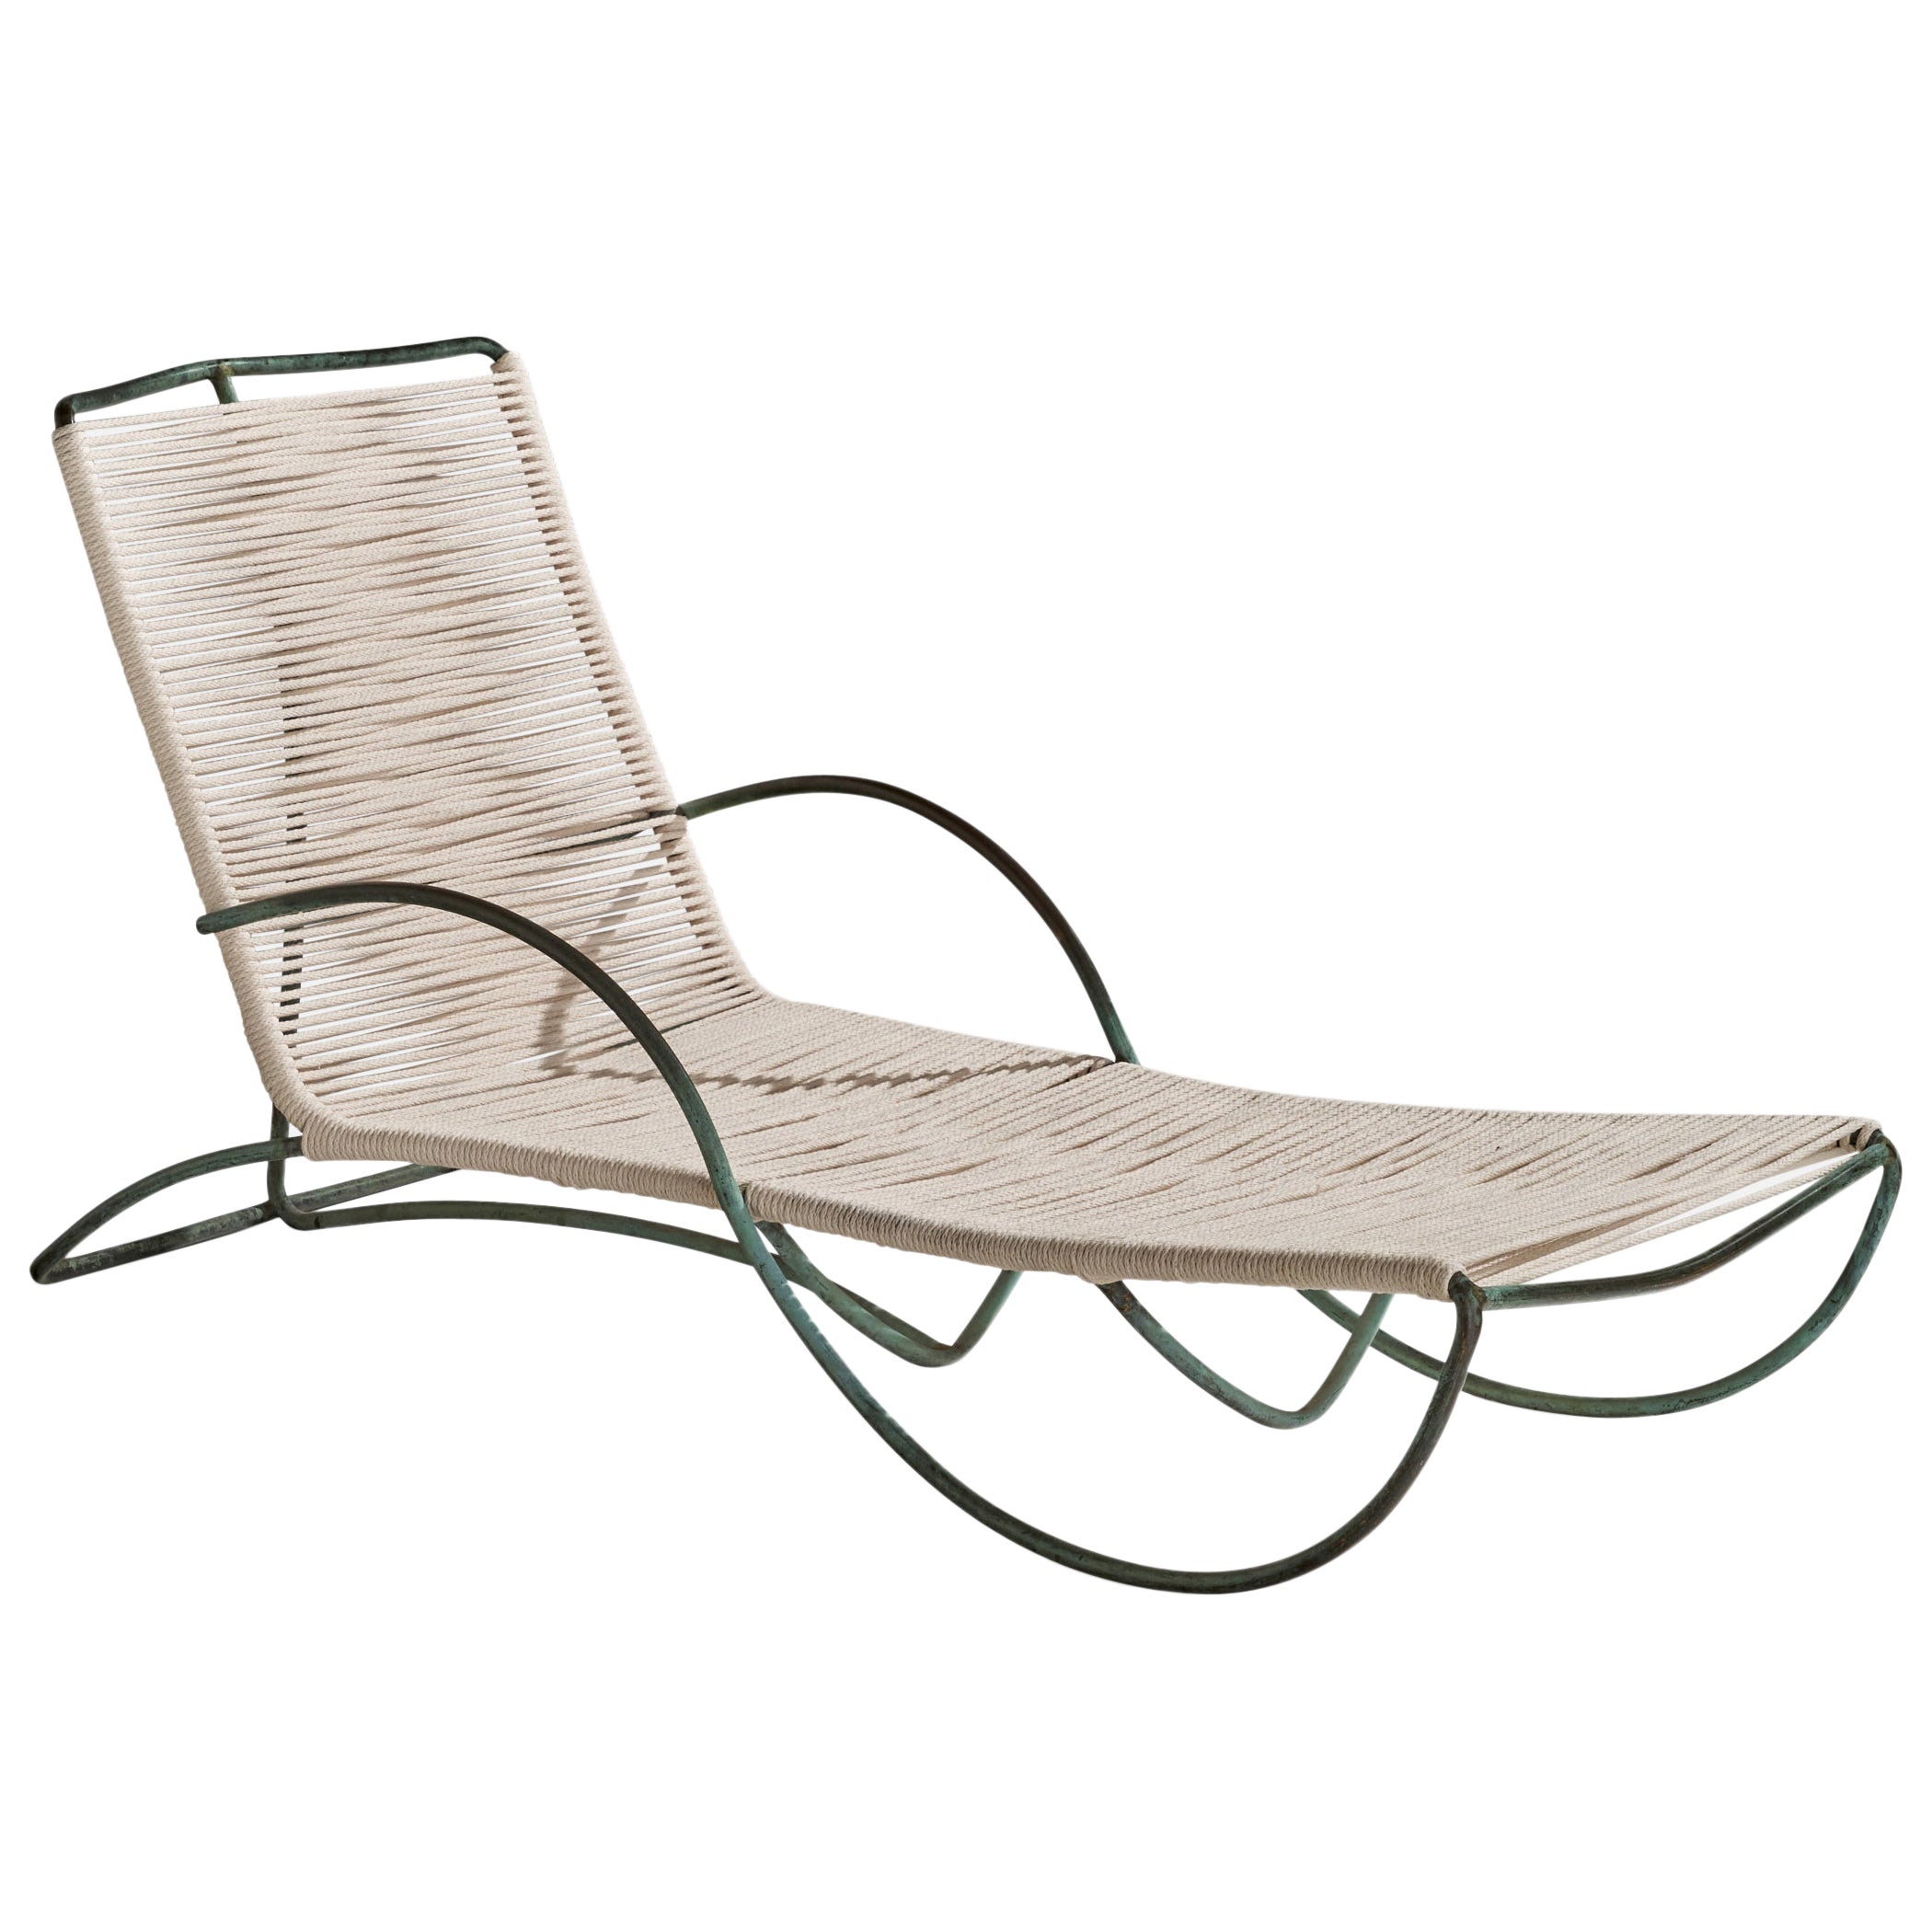 Walter Lamb, Chaise Longue, Bronze, Fabric, USA, 1955 For Sale